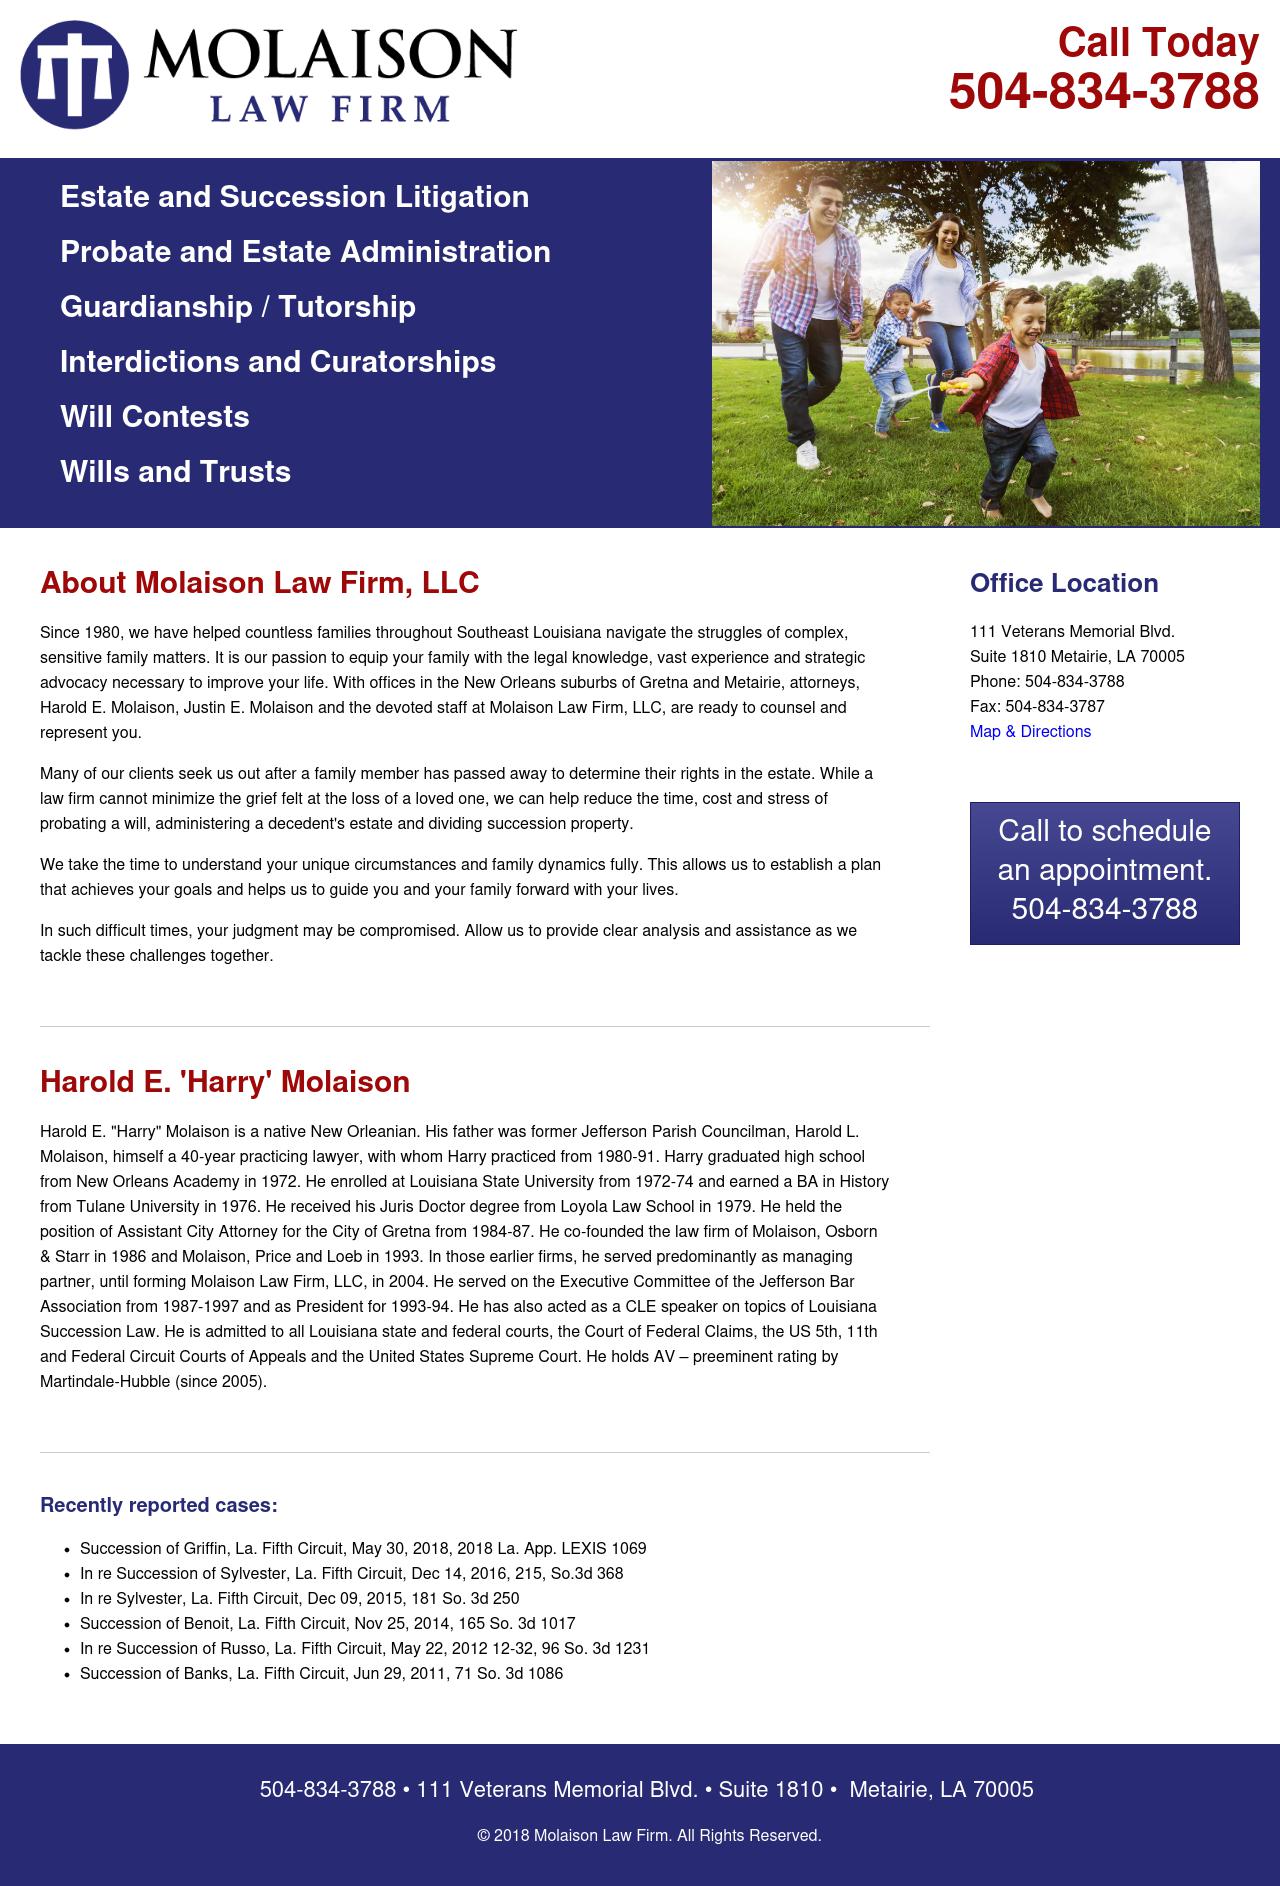 Molaison Law Firm, LLC - Metairie LA Lawyers